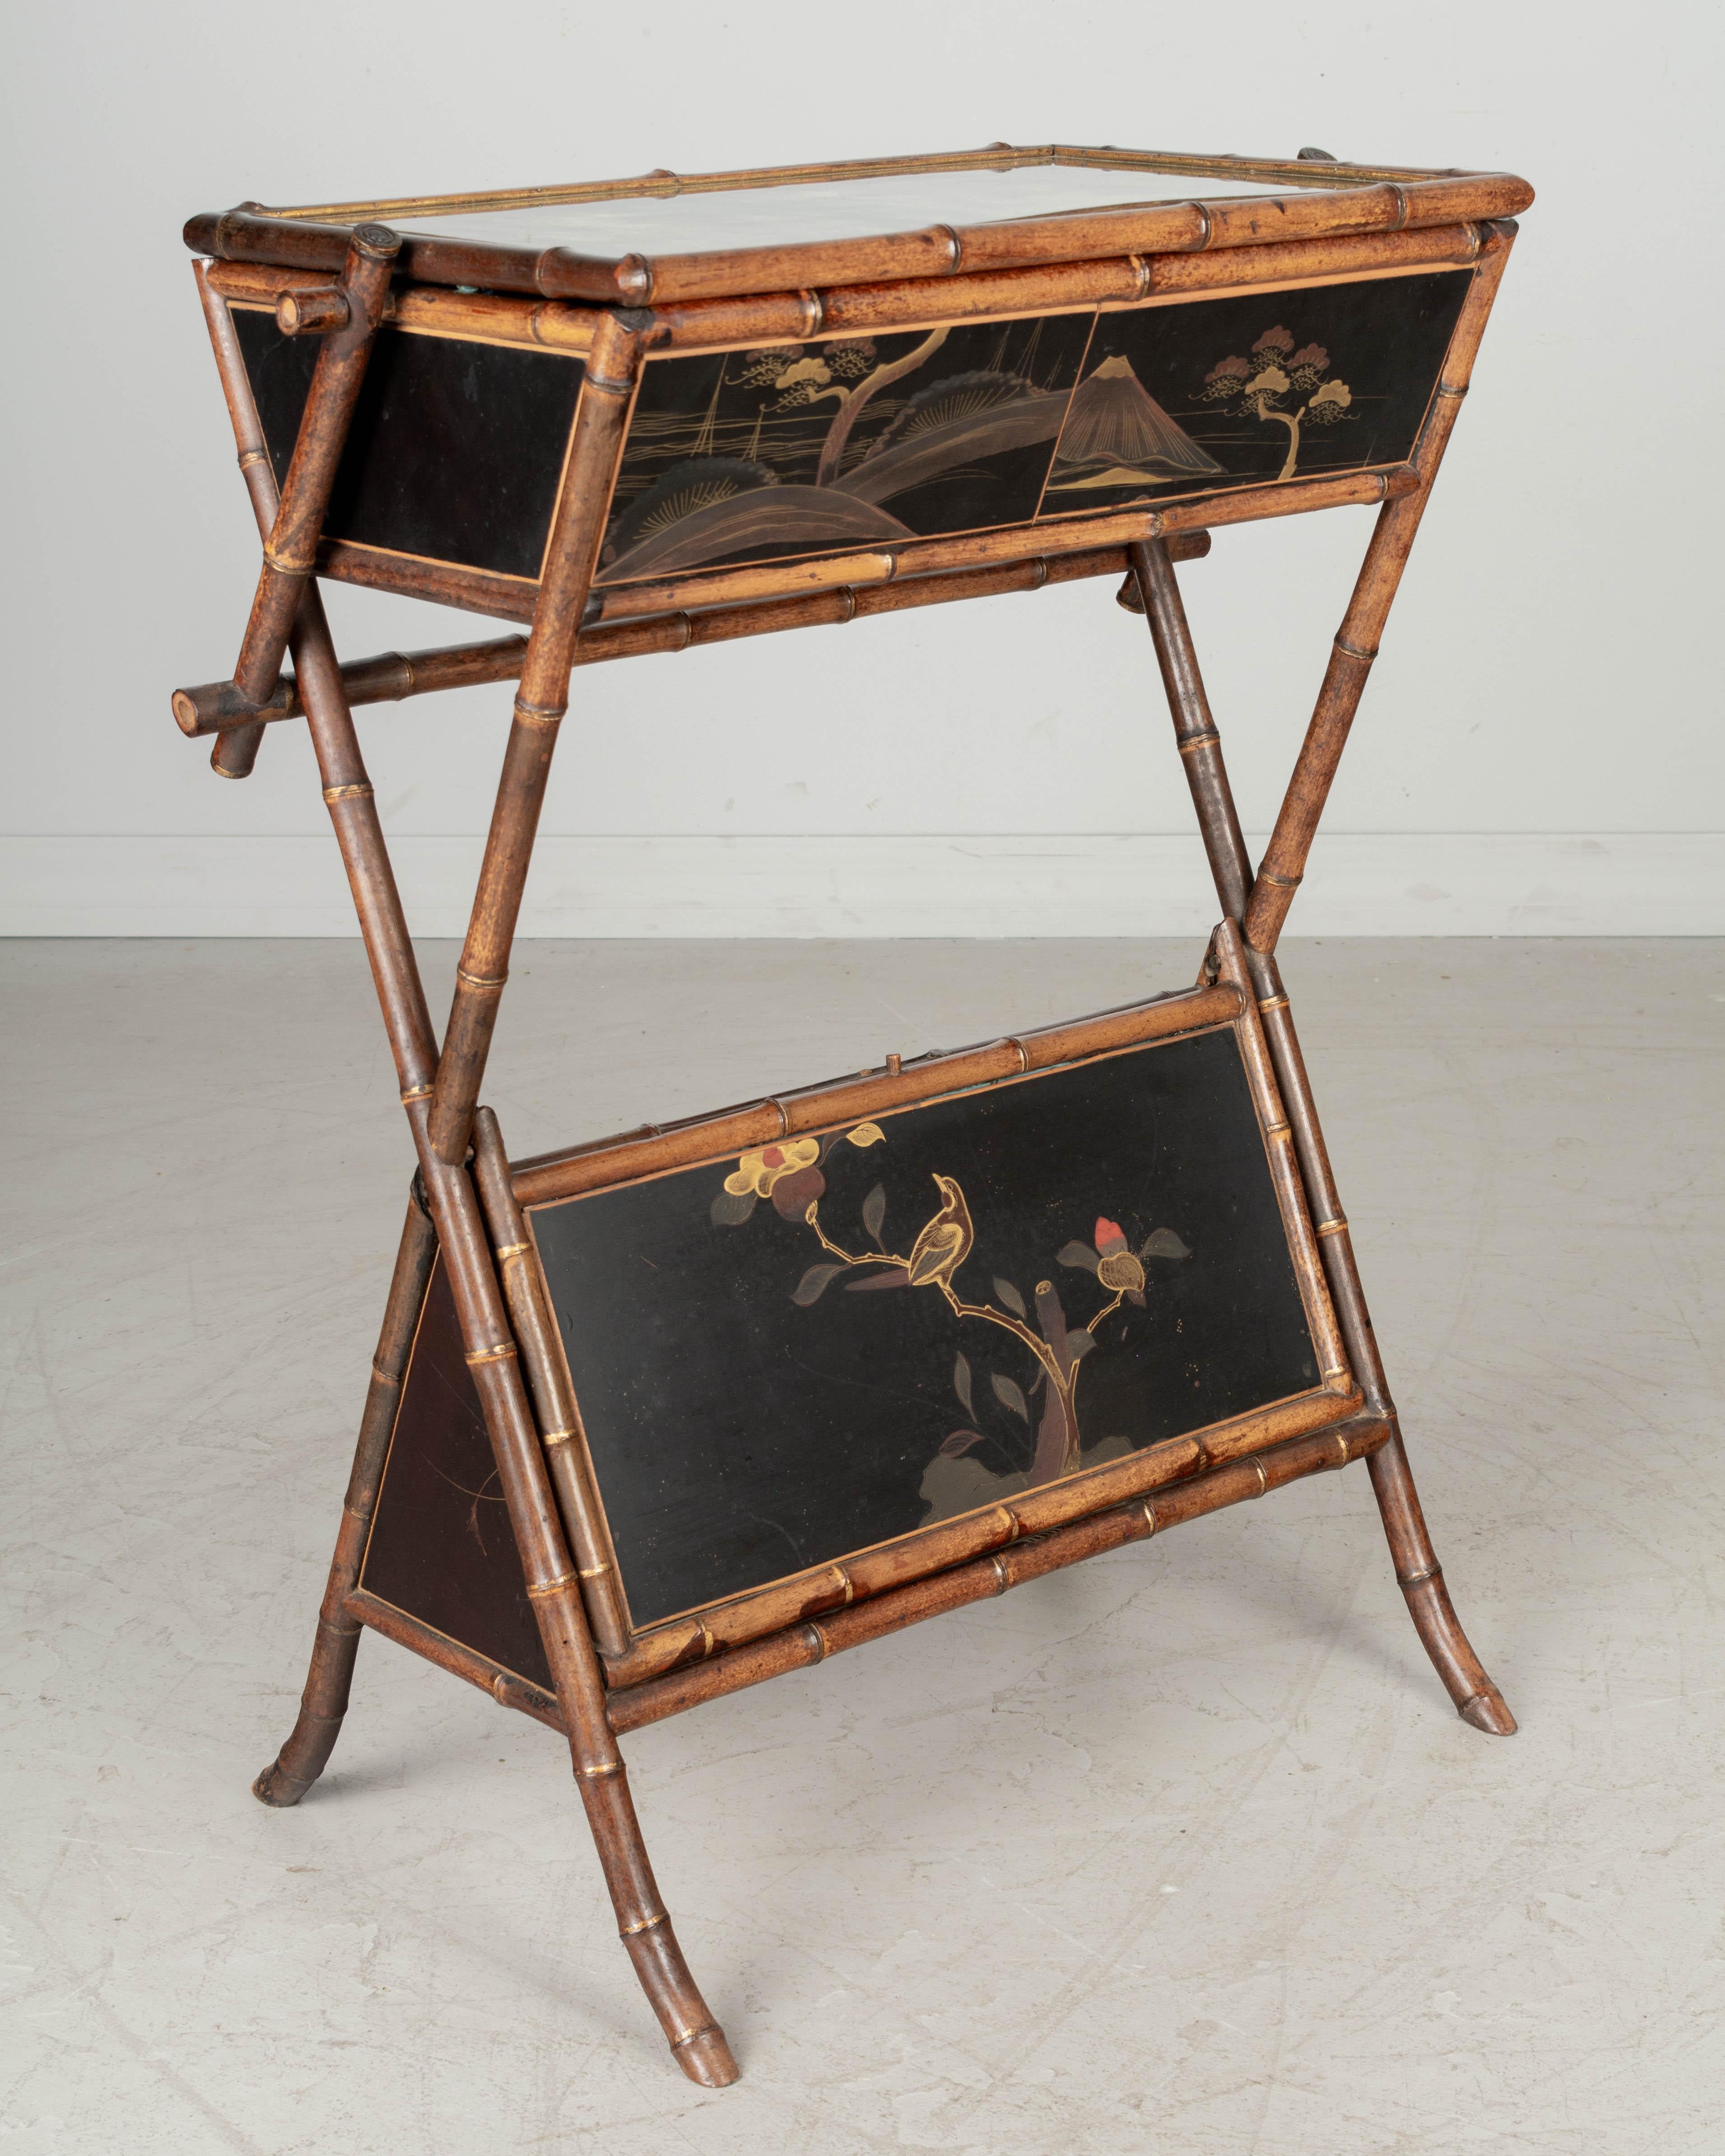 19th Century French Aesthetic Movement Bamboo Sewing Table In Good Condition For Sale In Winter Park, FL